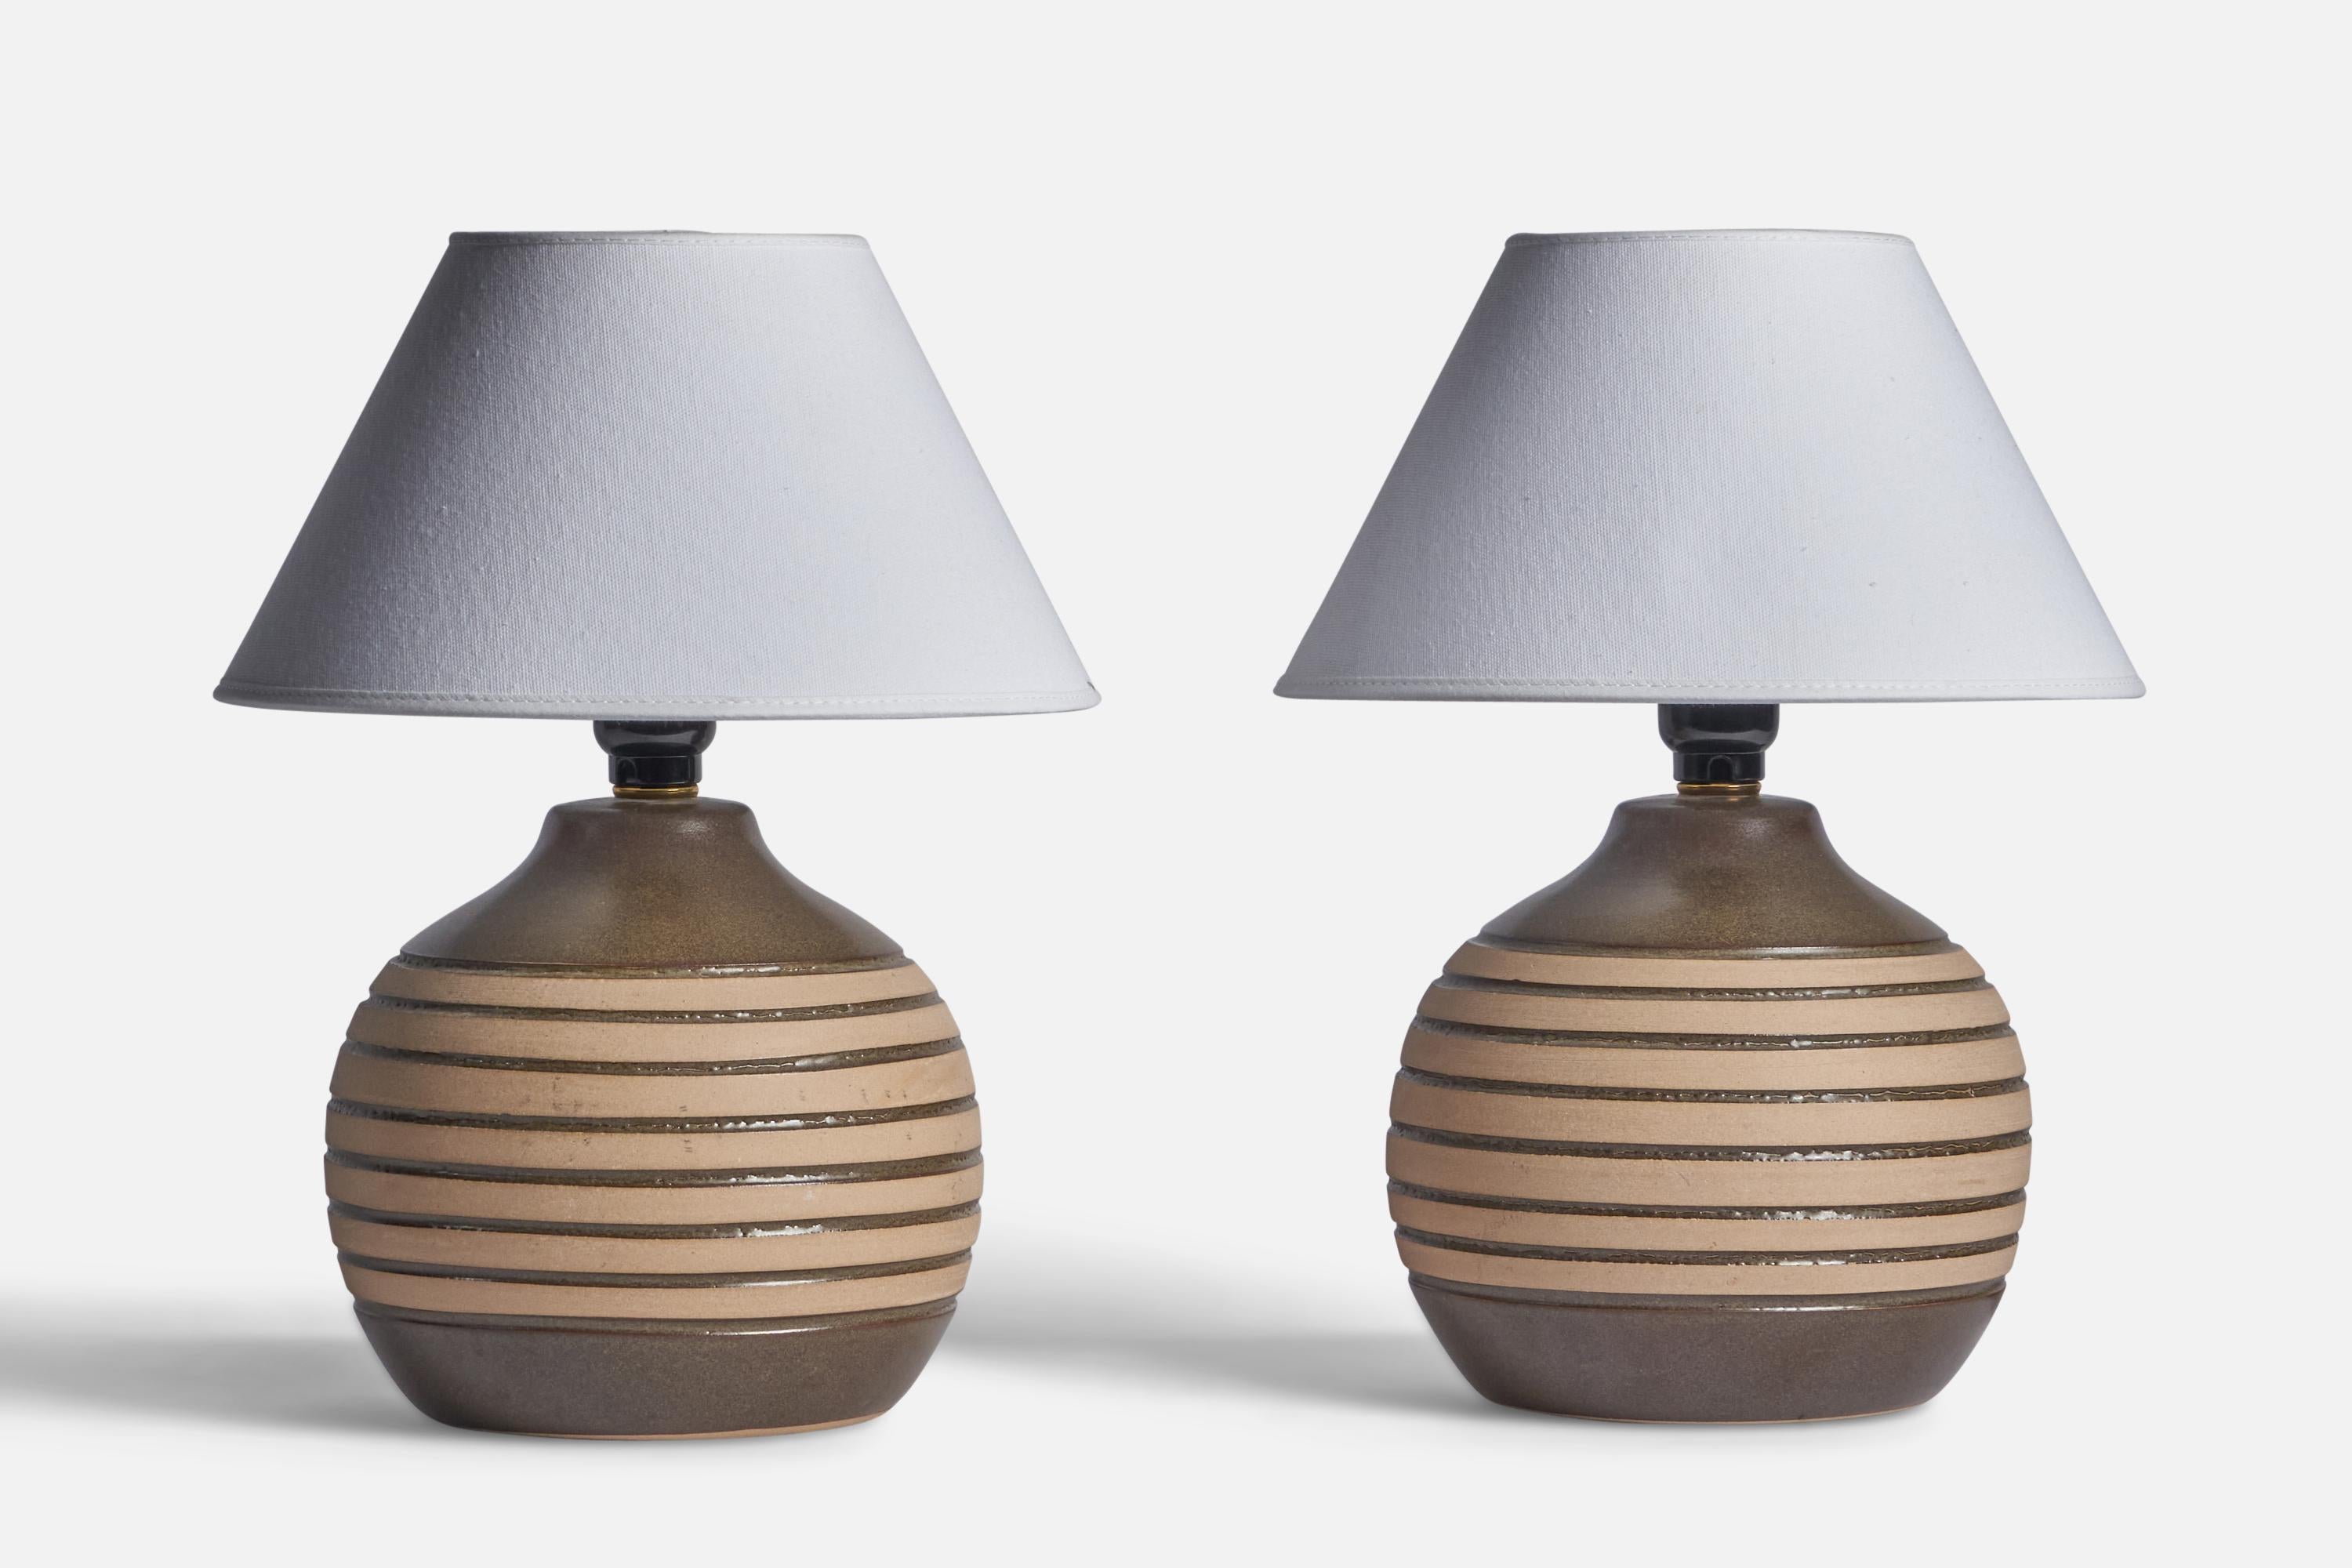 A pair of grey and beige-glazed ceramic table lamps designed by Jane & Gordon Martz and produced by Marshall Studios, USA, 1960s.

Dimensions of Lamp (inches): 10.25” H x 7.25” Diameter
Dimensions of Shade (inches): 4.5” Top Diameter x 10” Bottom